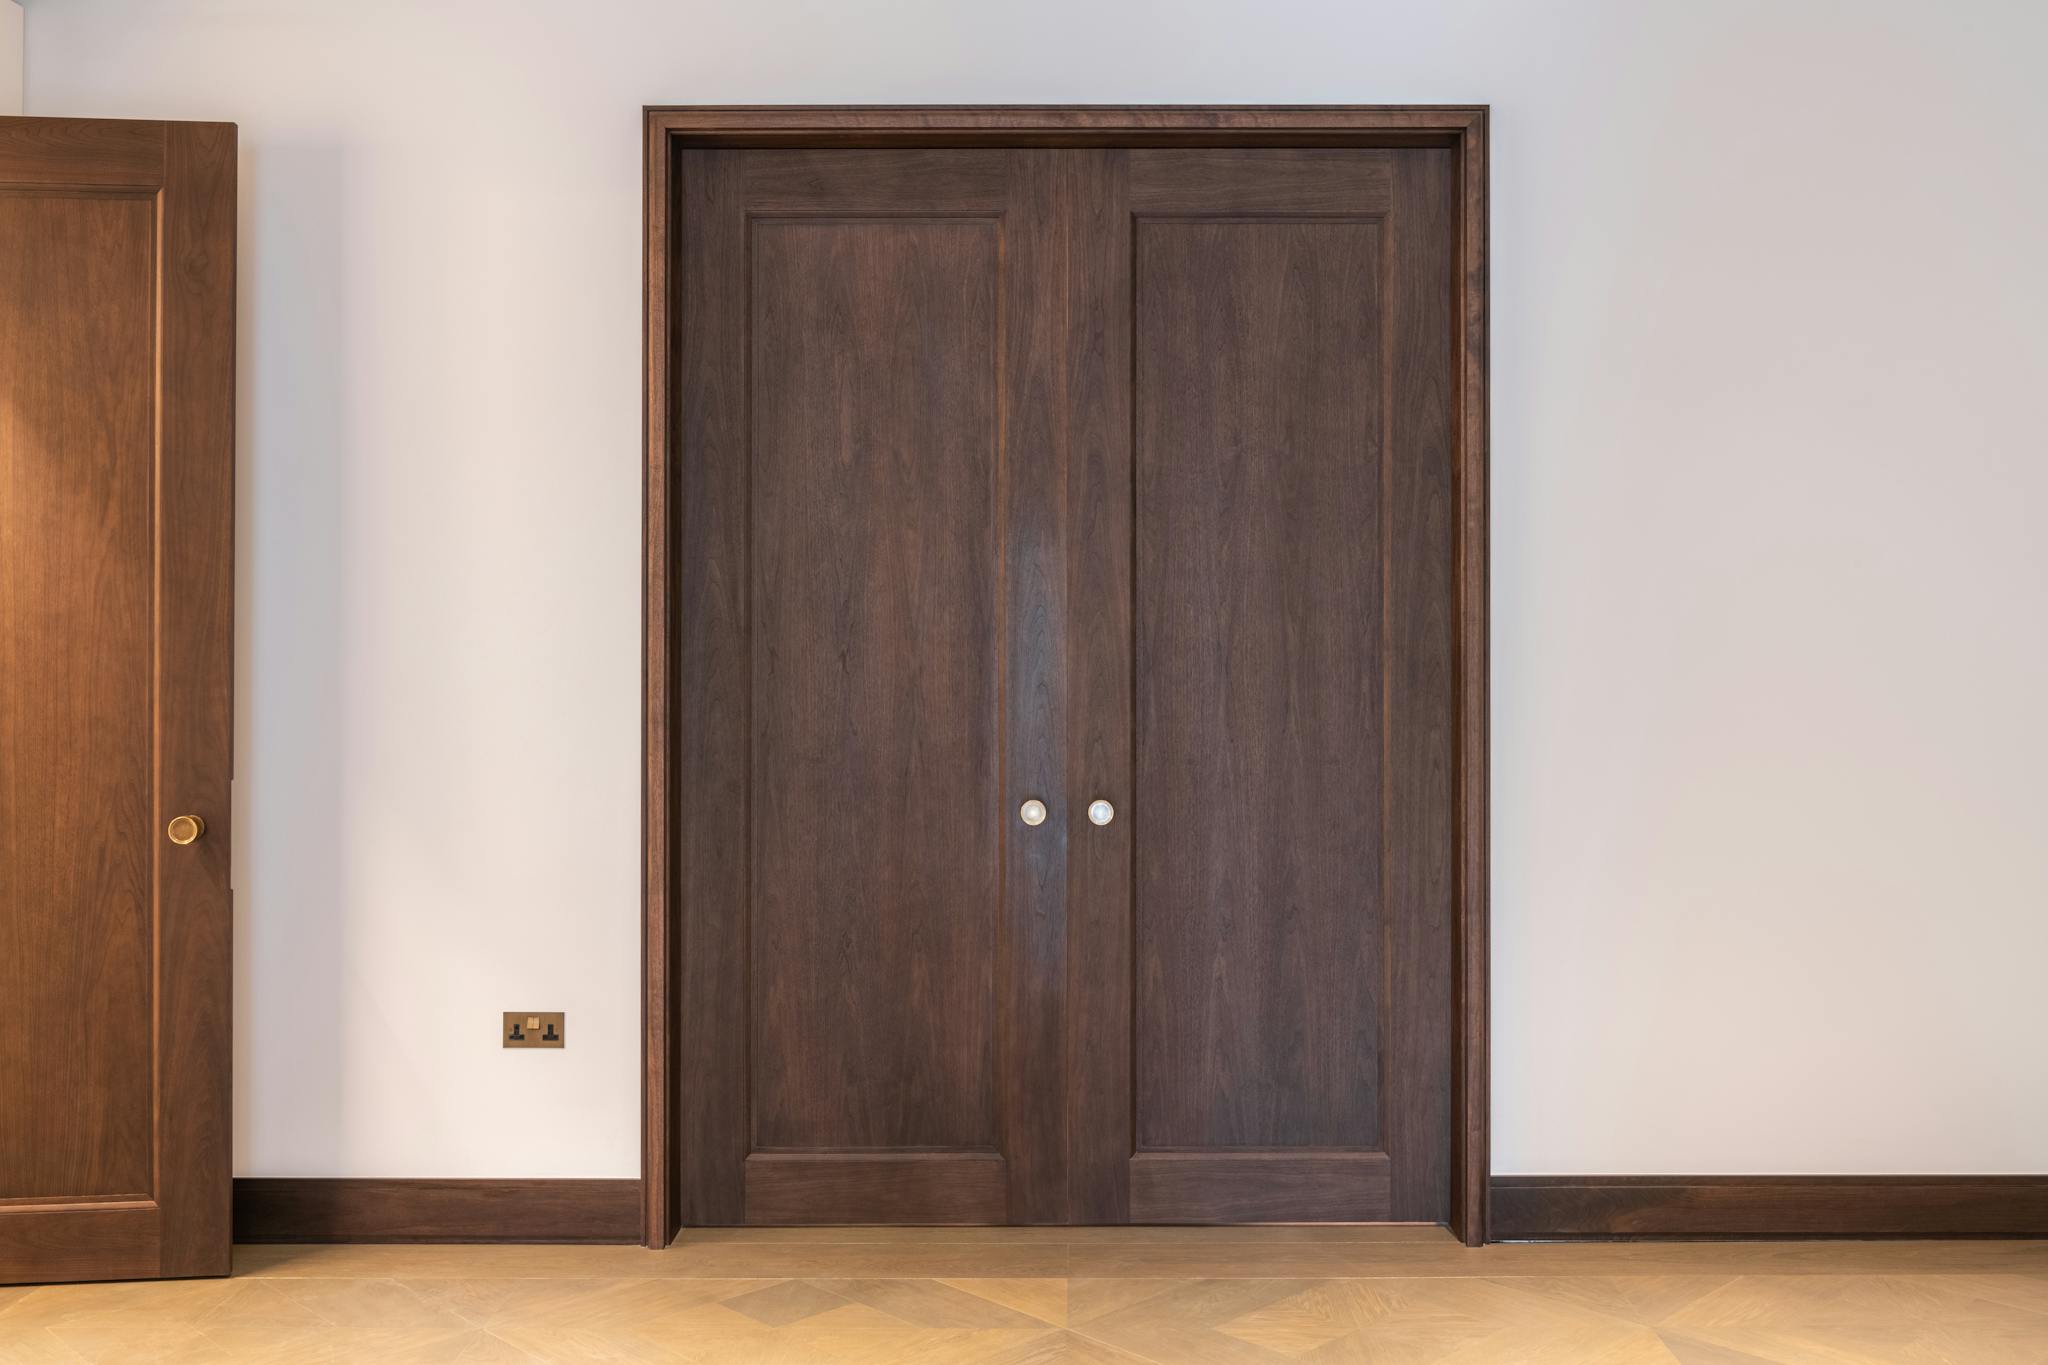 A luxury interior with fully closed set of heavy wooden pocket doors with solid brass ironmongery.